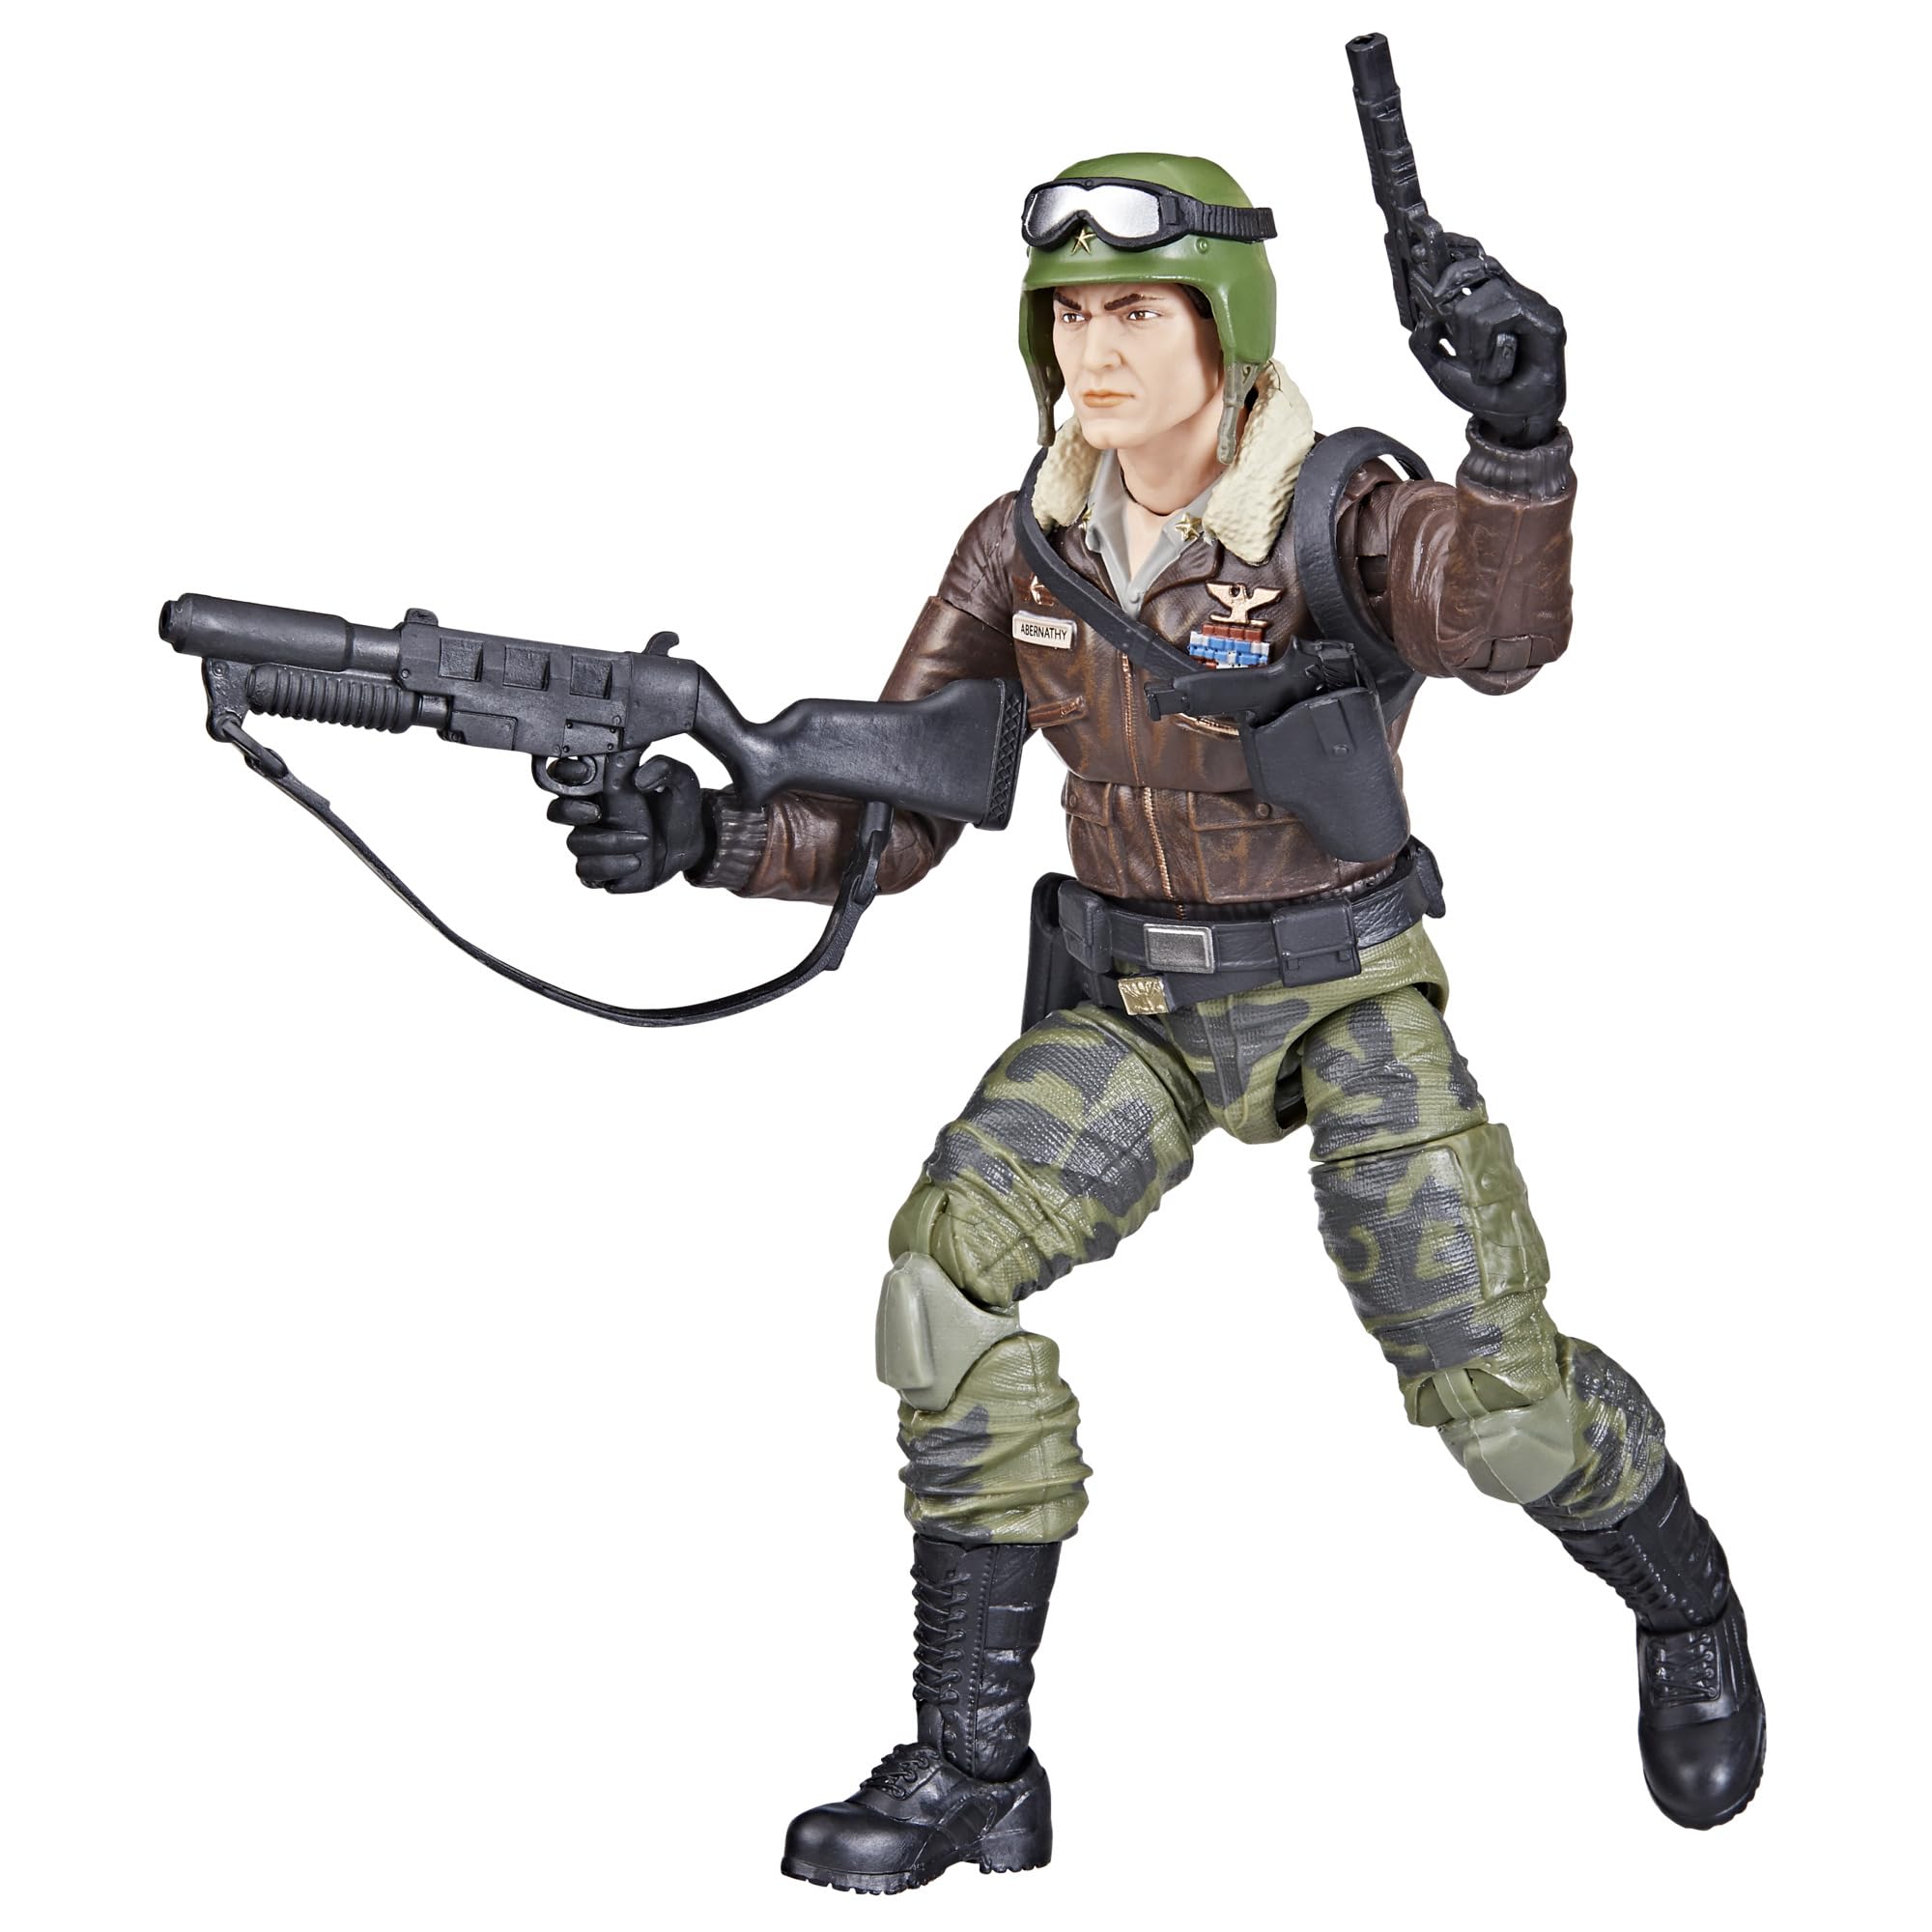 G.I. Joe Classified Series General Clayton Hawk Abernathy, Collectible Action Figure, 103, 6 inch Action Figures for Boys & Girls, with 7 Accessory Pieces